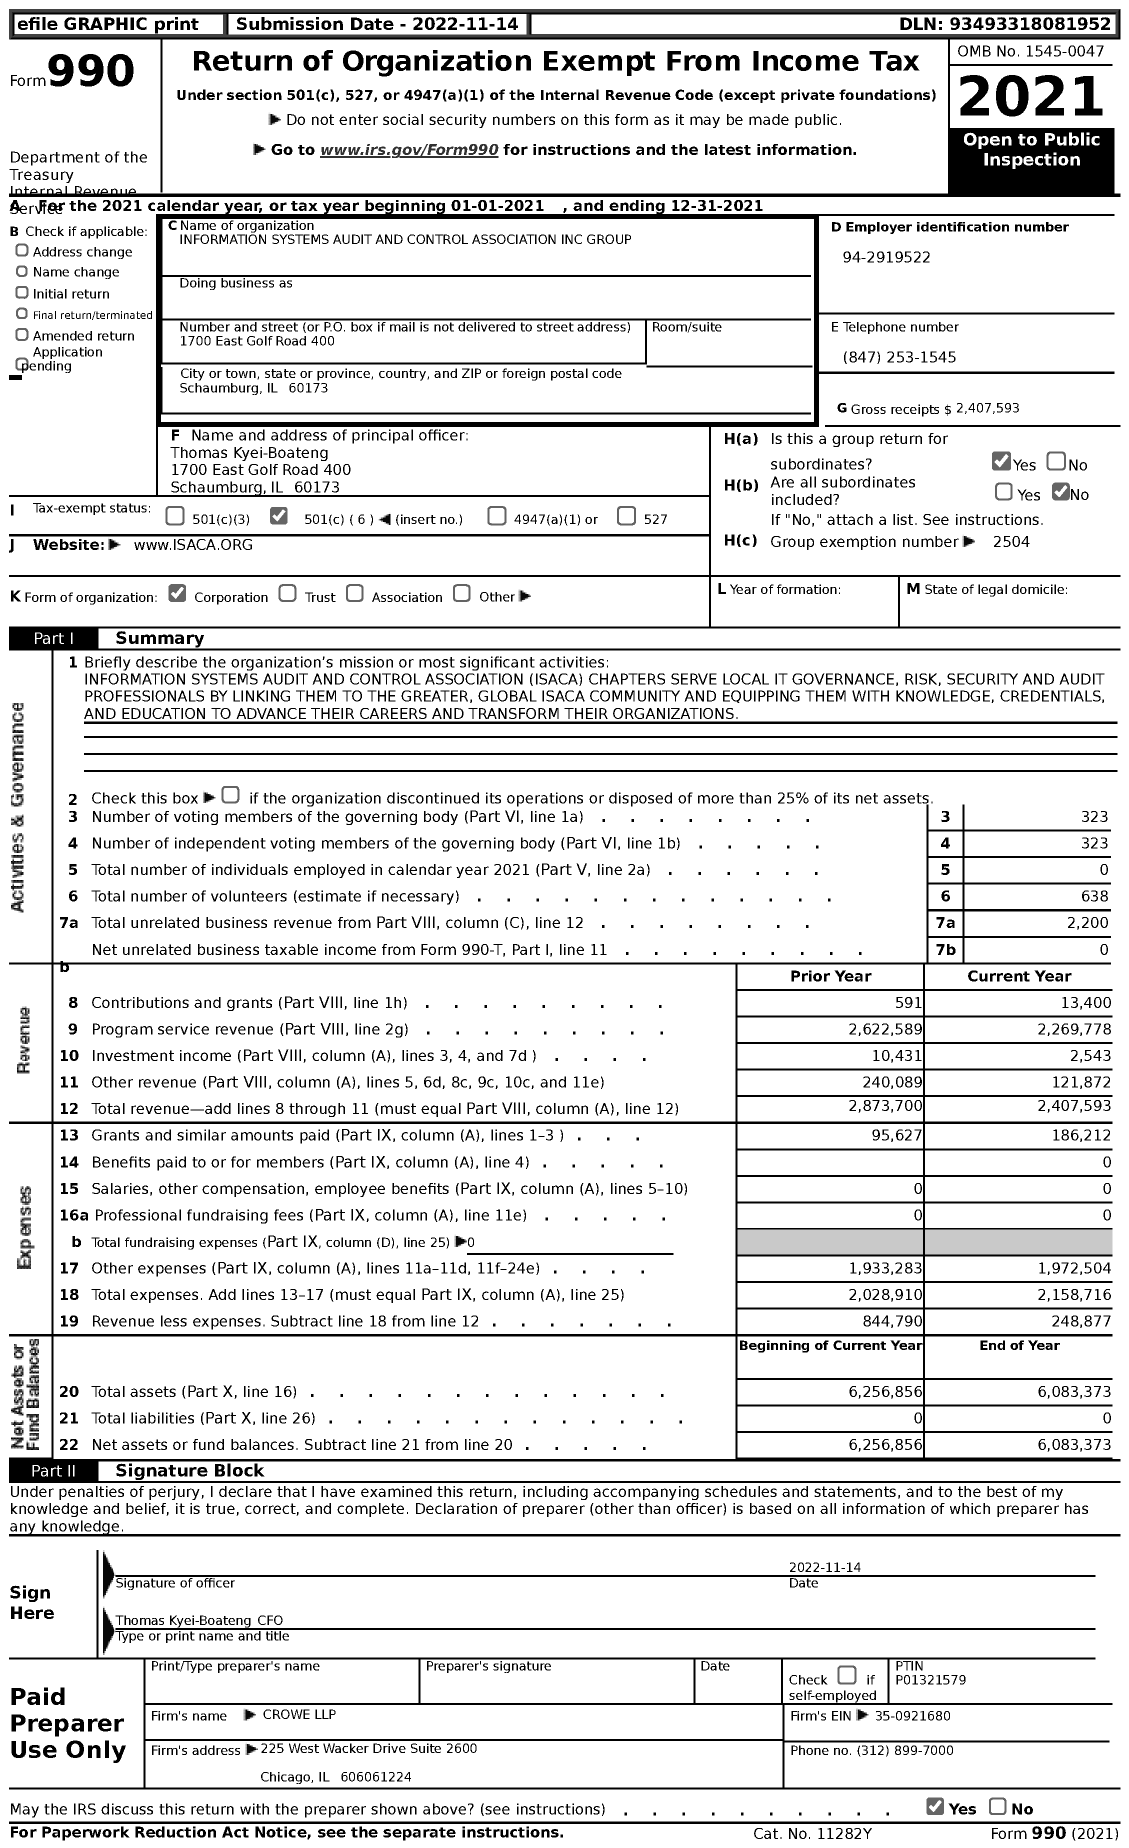 Image of first page of 2021 Form 990 for Information Systems Audit and Control Association Group (ISACA)